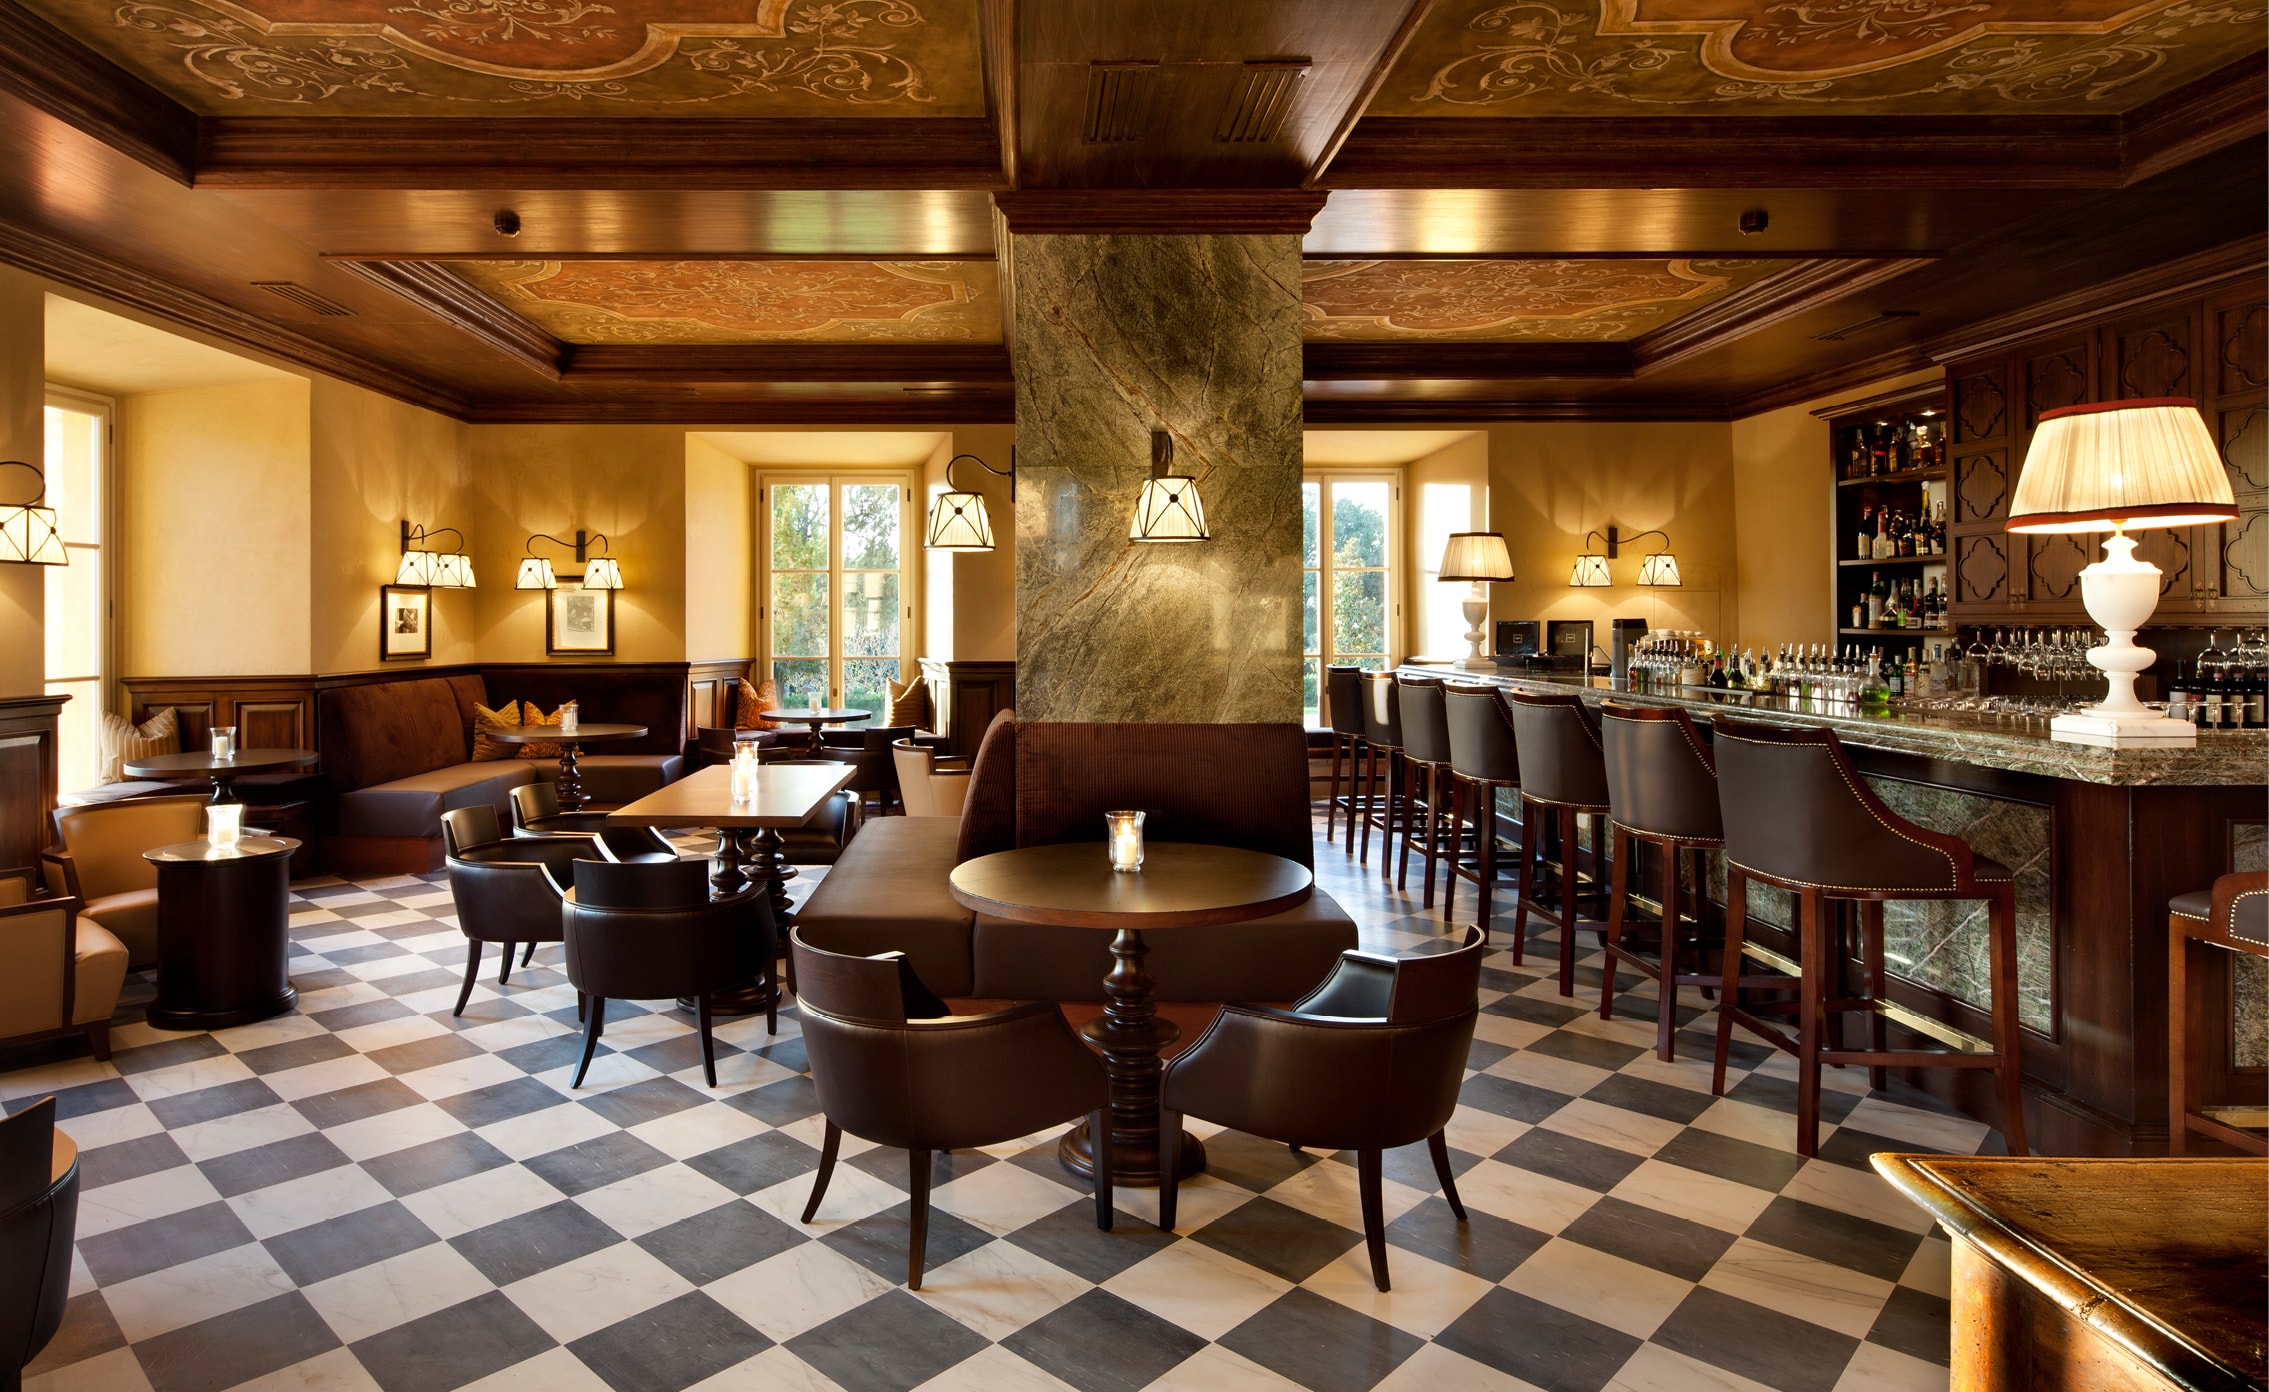 classical italian design is given a modern mood at the hotel castello di casole in italy by j banks design group